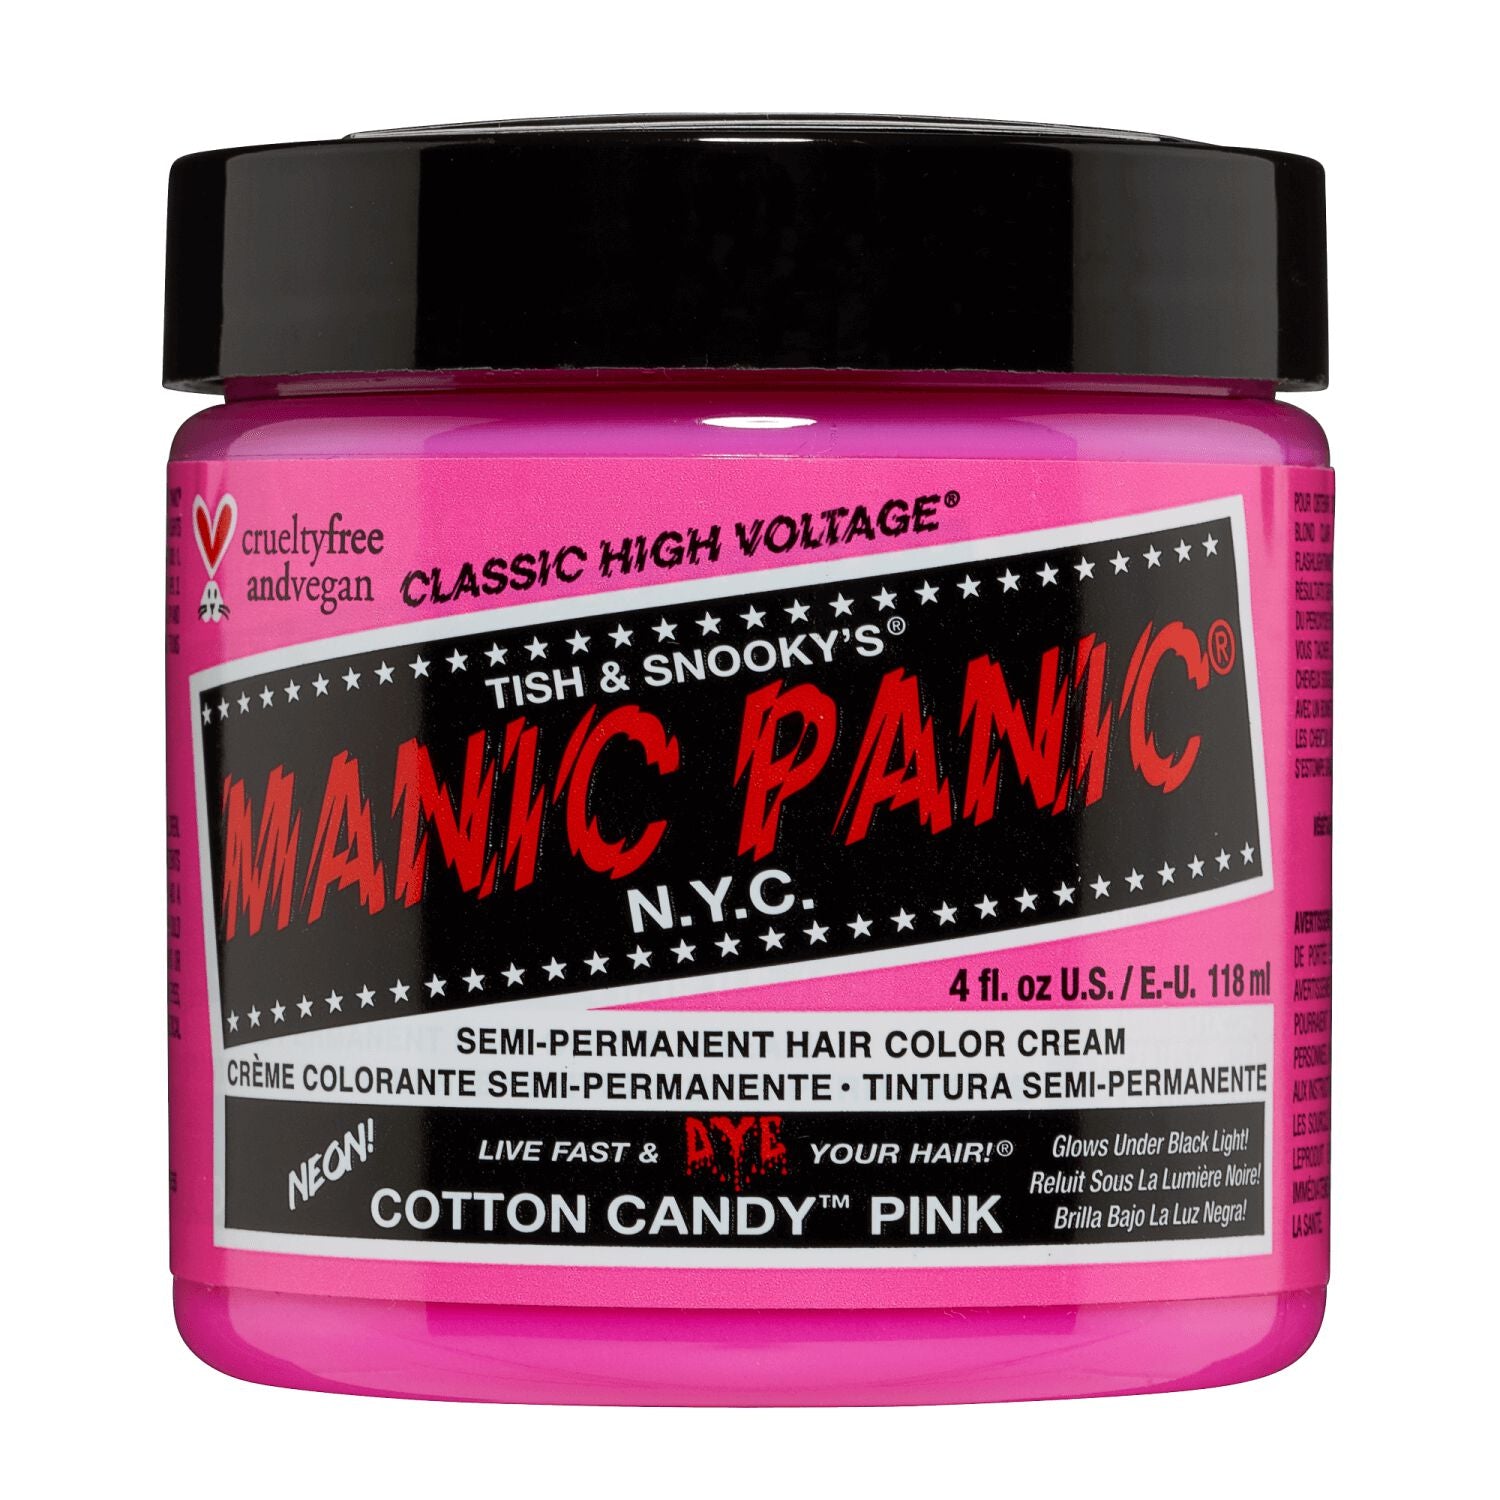 Manic Panic® Classic High Voltage Hair Color - Cotton Candy Pink